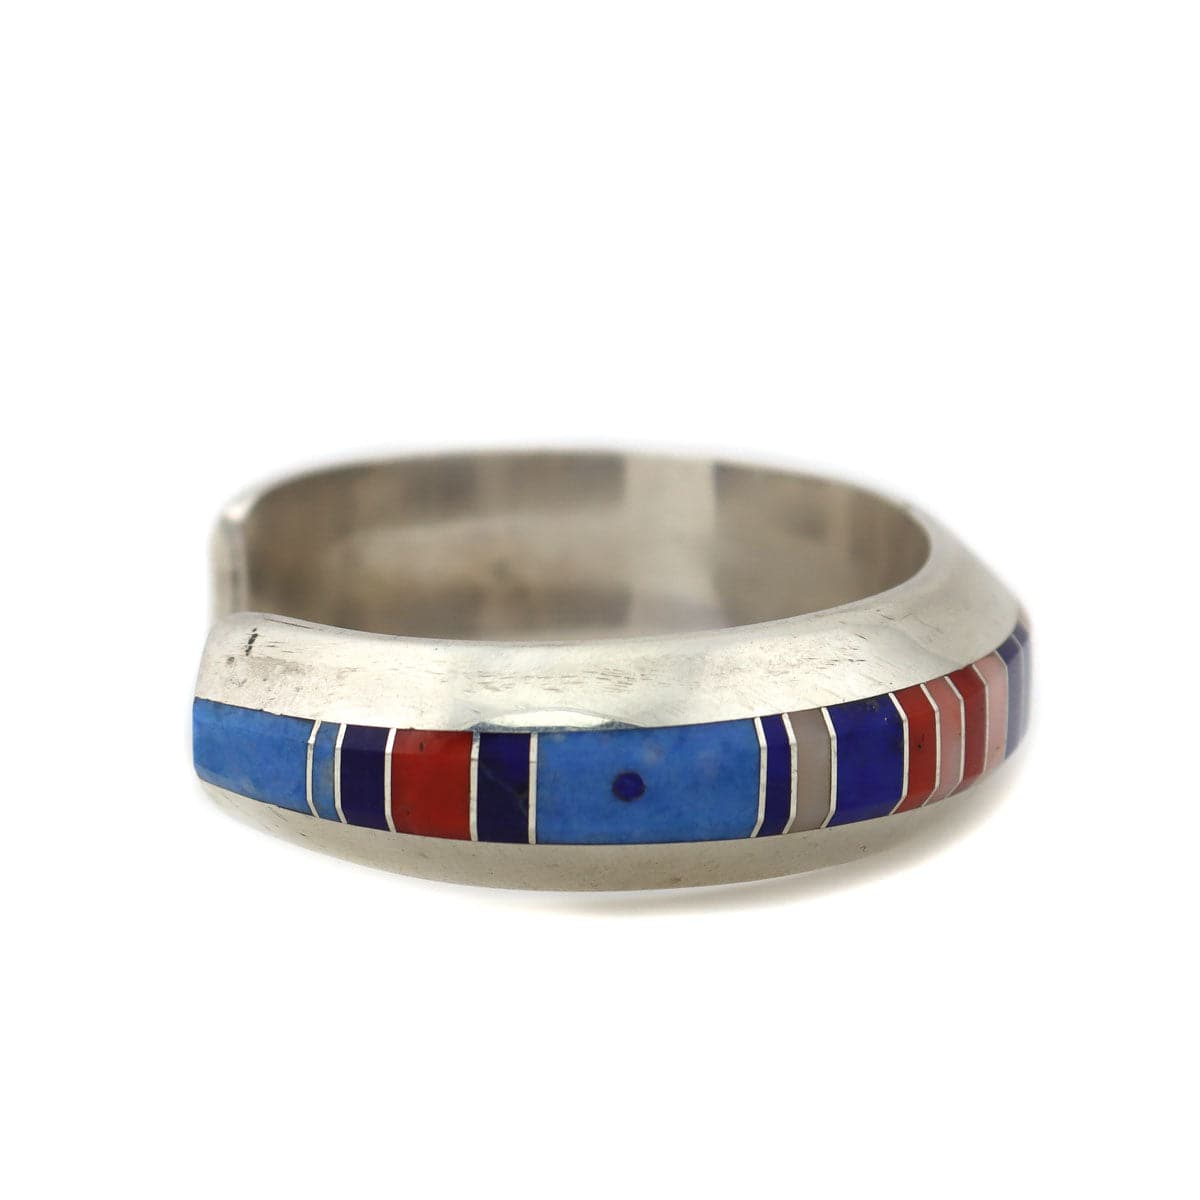 Gibson Nez - Navajo Multi-Stone Channel Inlay and Silver Bracelet c. 1990s (J14190-020-CO)3